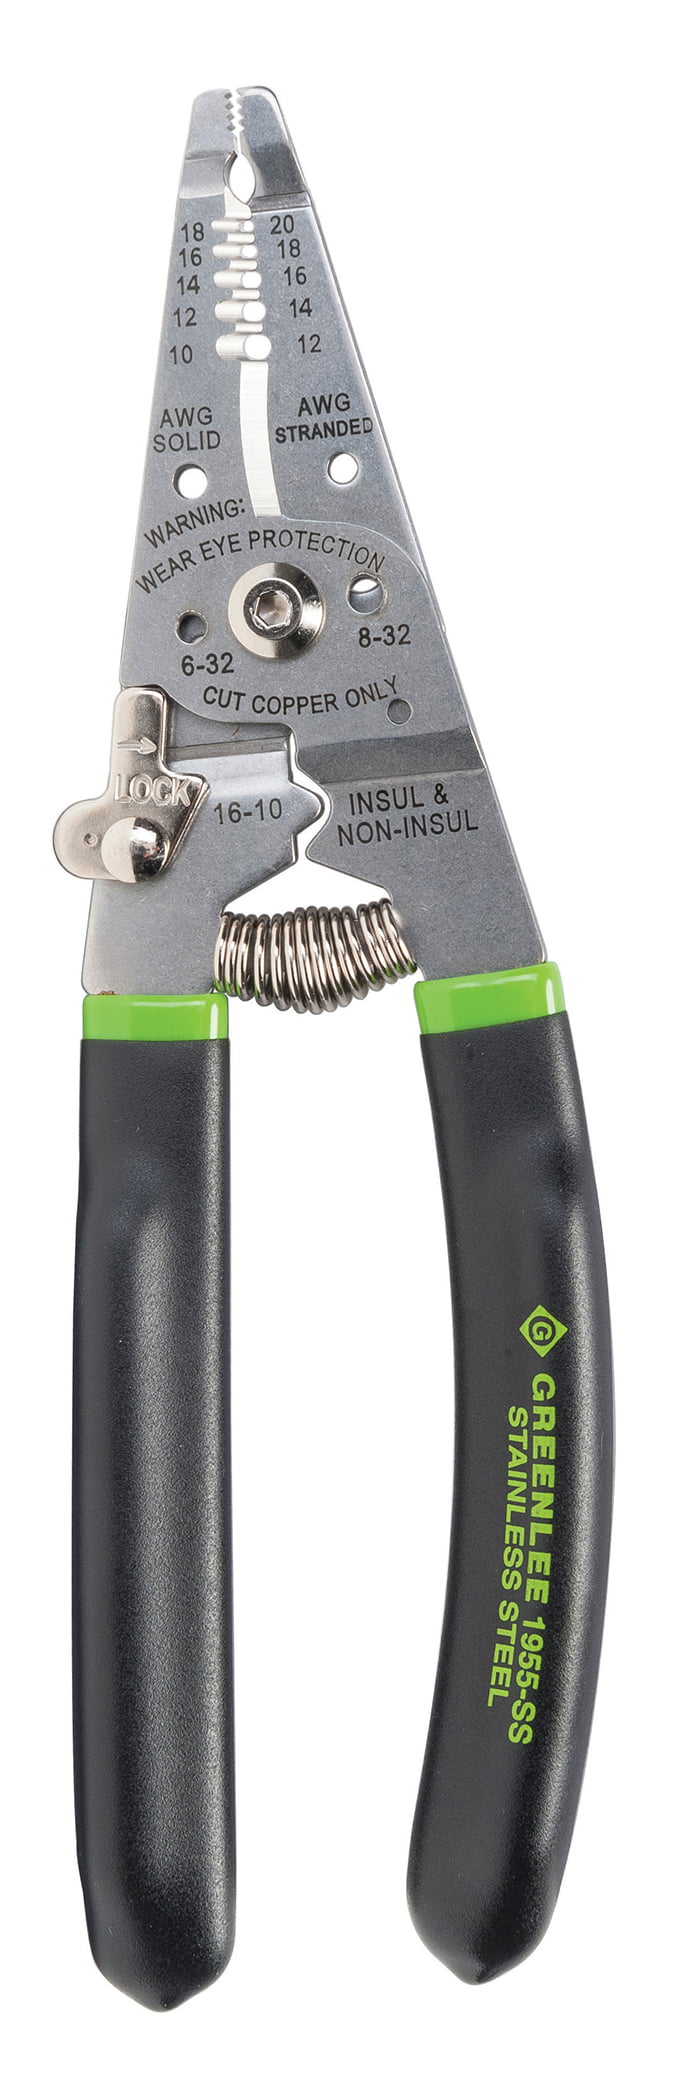 Cutter Greenlee Stainless Steel Wire Stripper Crimper Solid Stranded 10-20 AWG 